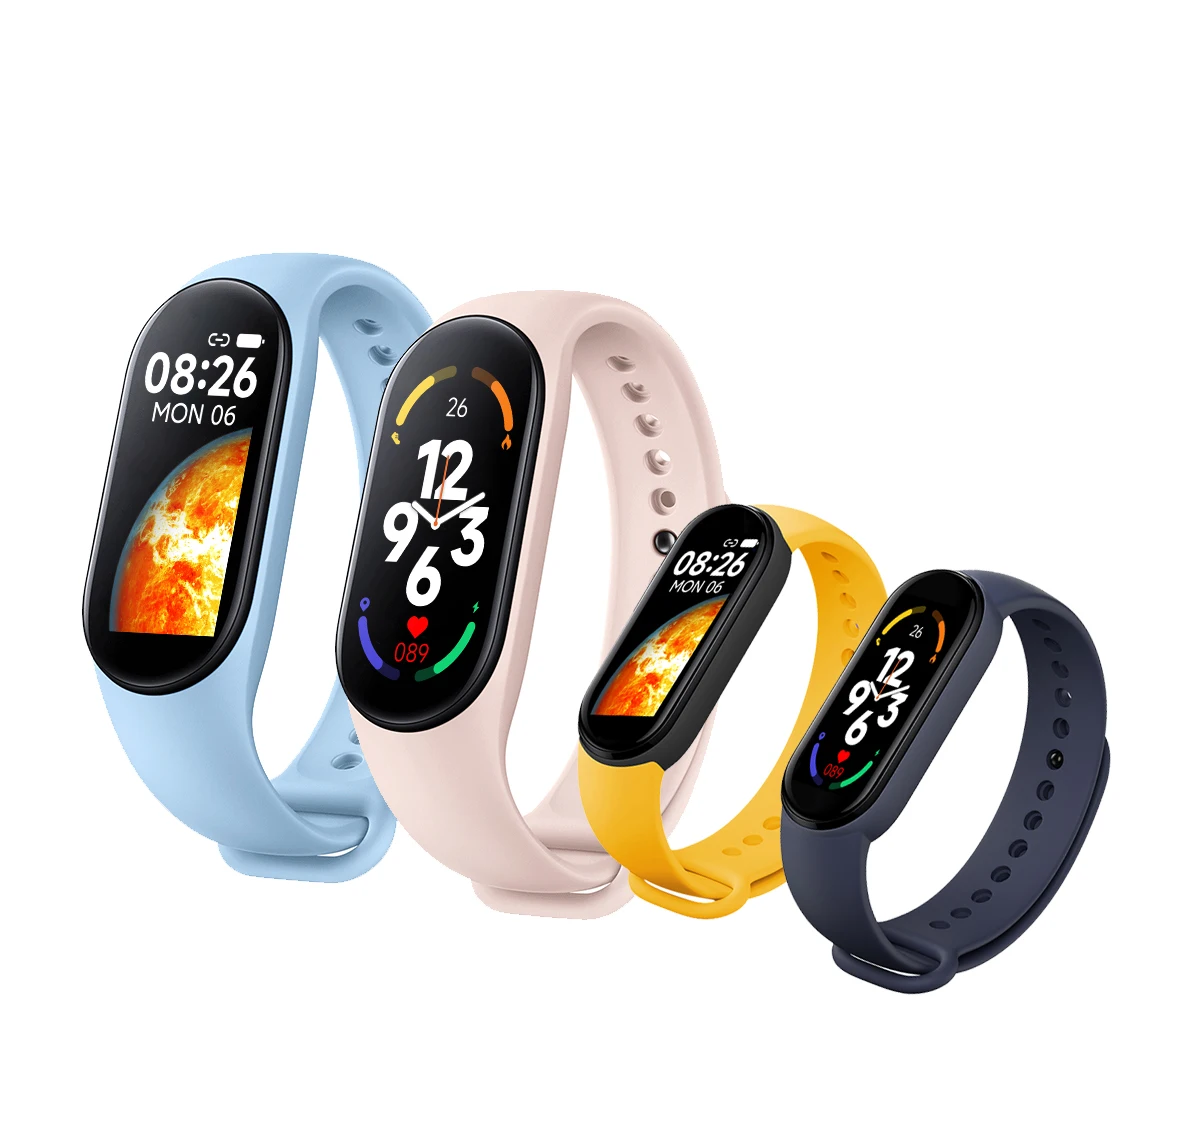 Amazon.com: M4 Exercise/Health Smart Watch, Sleek Narrow Design, HR  Monitor, Call/Msg, Sleep/Step/Calories/Distance Tracker, Waterproof,  Weather. for Adults/Kids : Sports & Outdoors